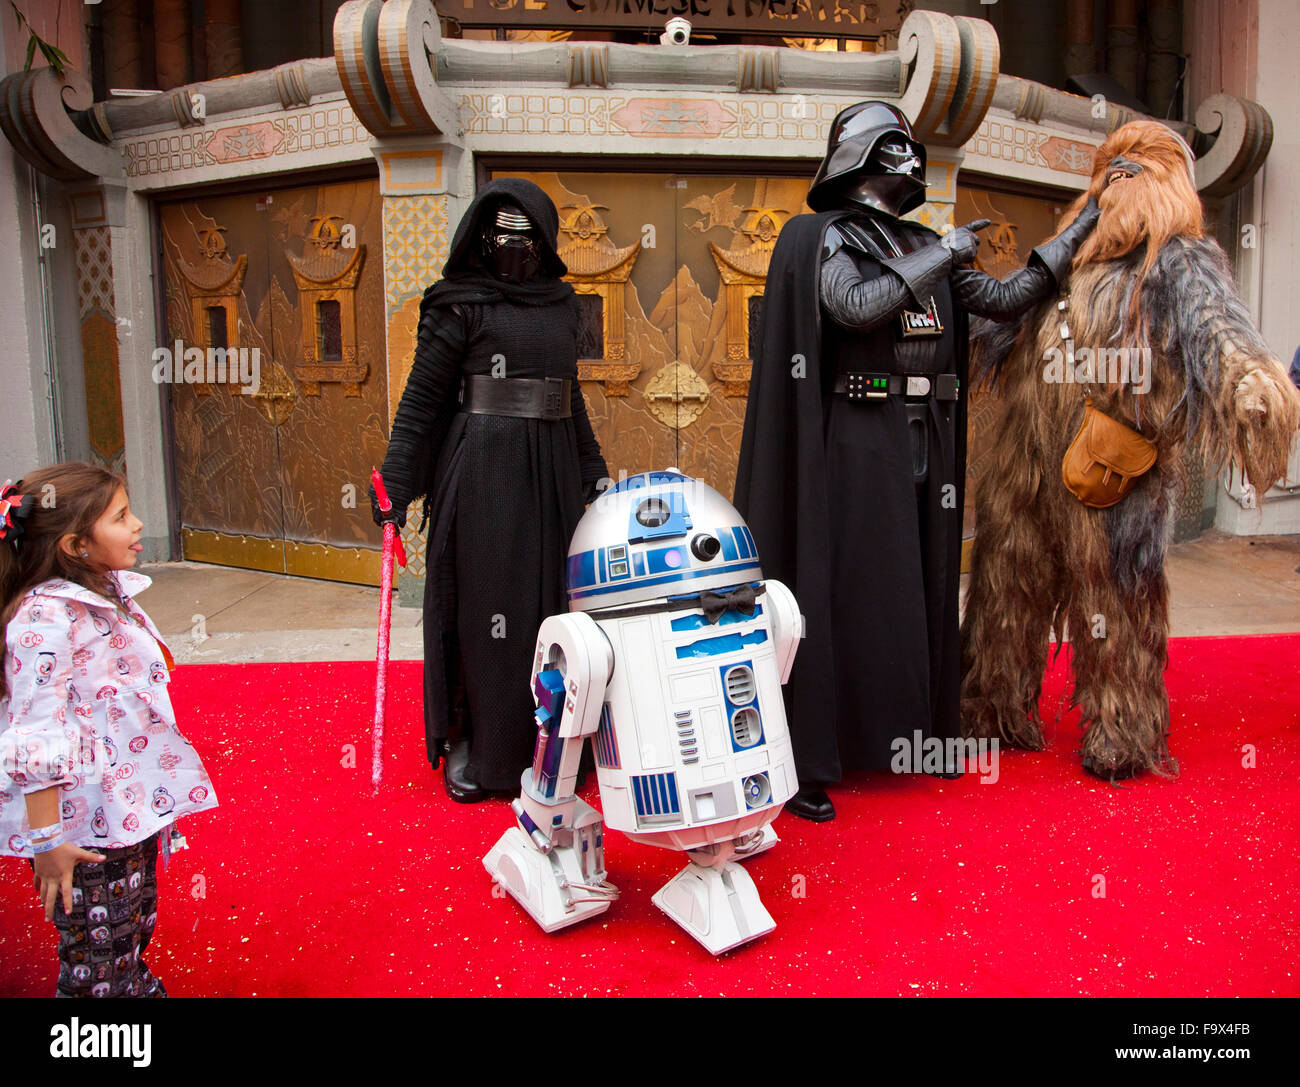 A Star Wars Wedding - on 12/17/2015 Caroline Ritter (truck driver, 34 years old) married Andrew Porters (fireman, 29 years old) got married at TCL Chinese Theatre IMAX, 6925 Hollywood Blvd., Hollywood, California  Crowds watched as the happy couple married in front of the theater. Money was donated in their name by IMAX to the Starlight Children's Foundation. Stock Photo